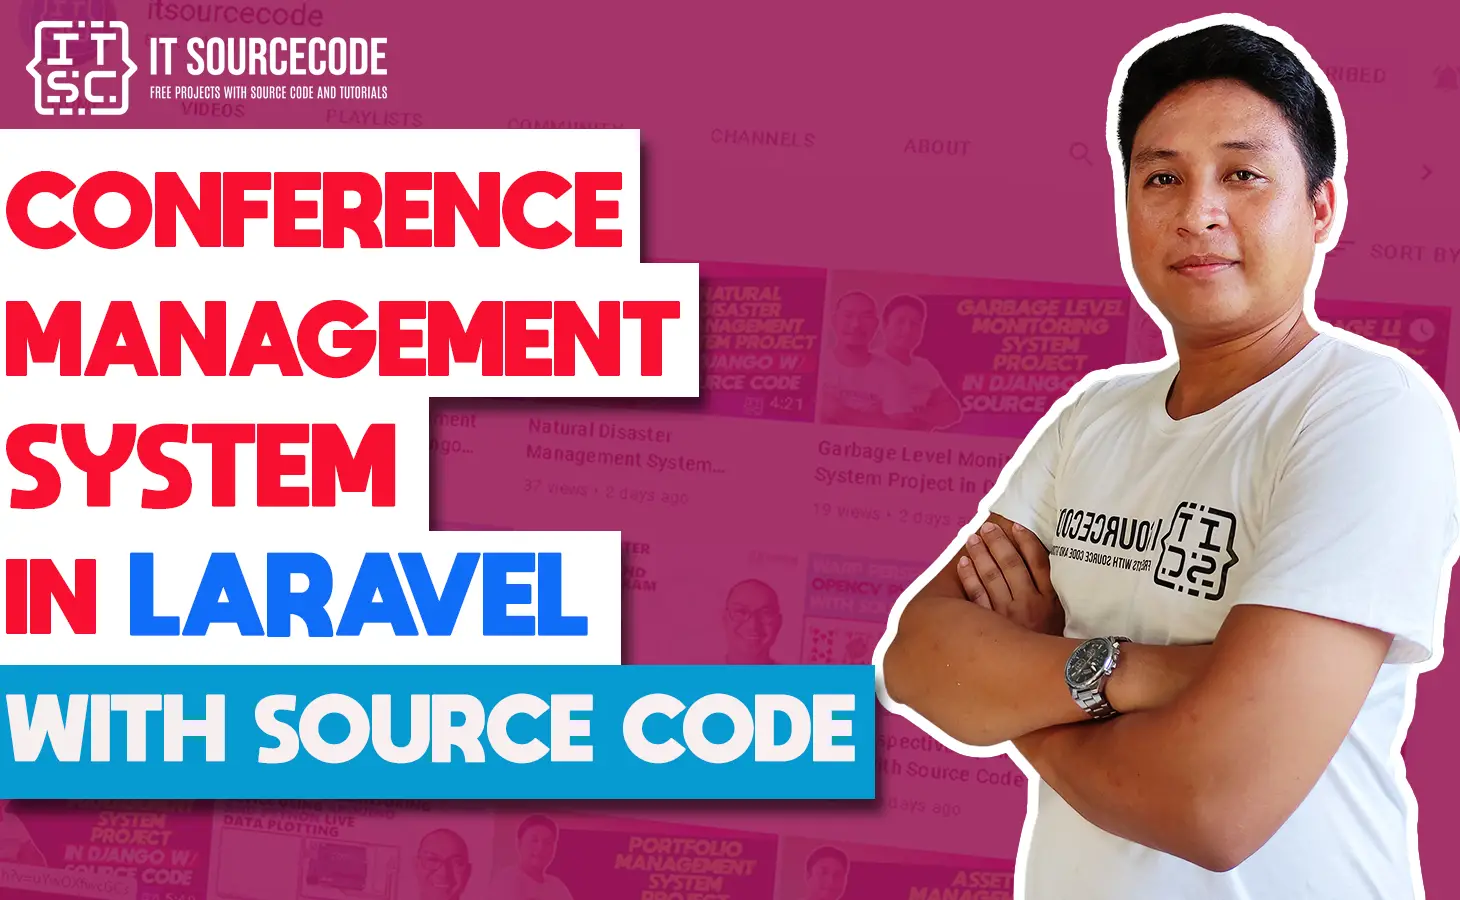 Conference Management System Project in Laravel with Source Code